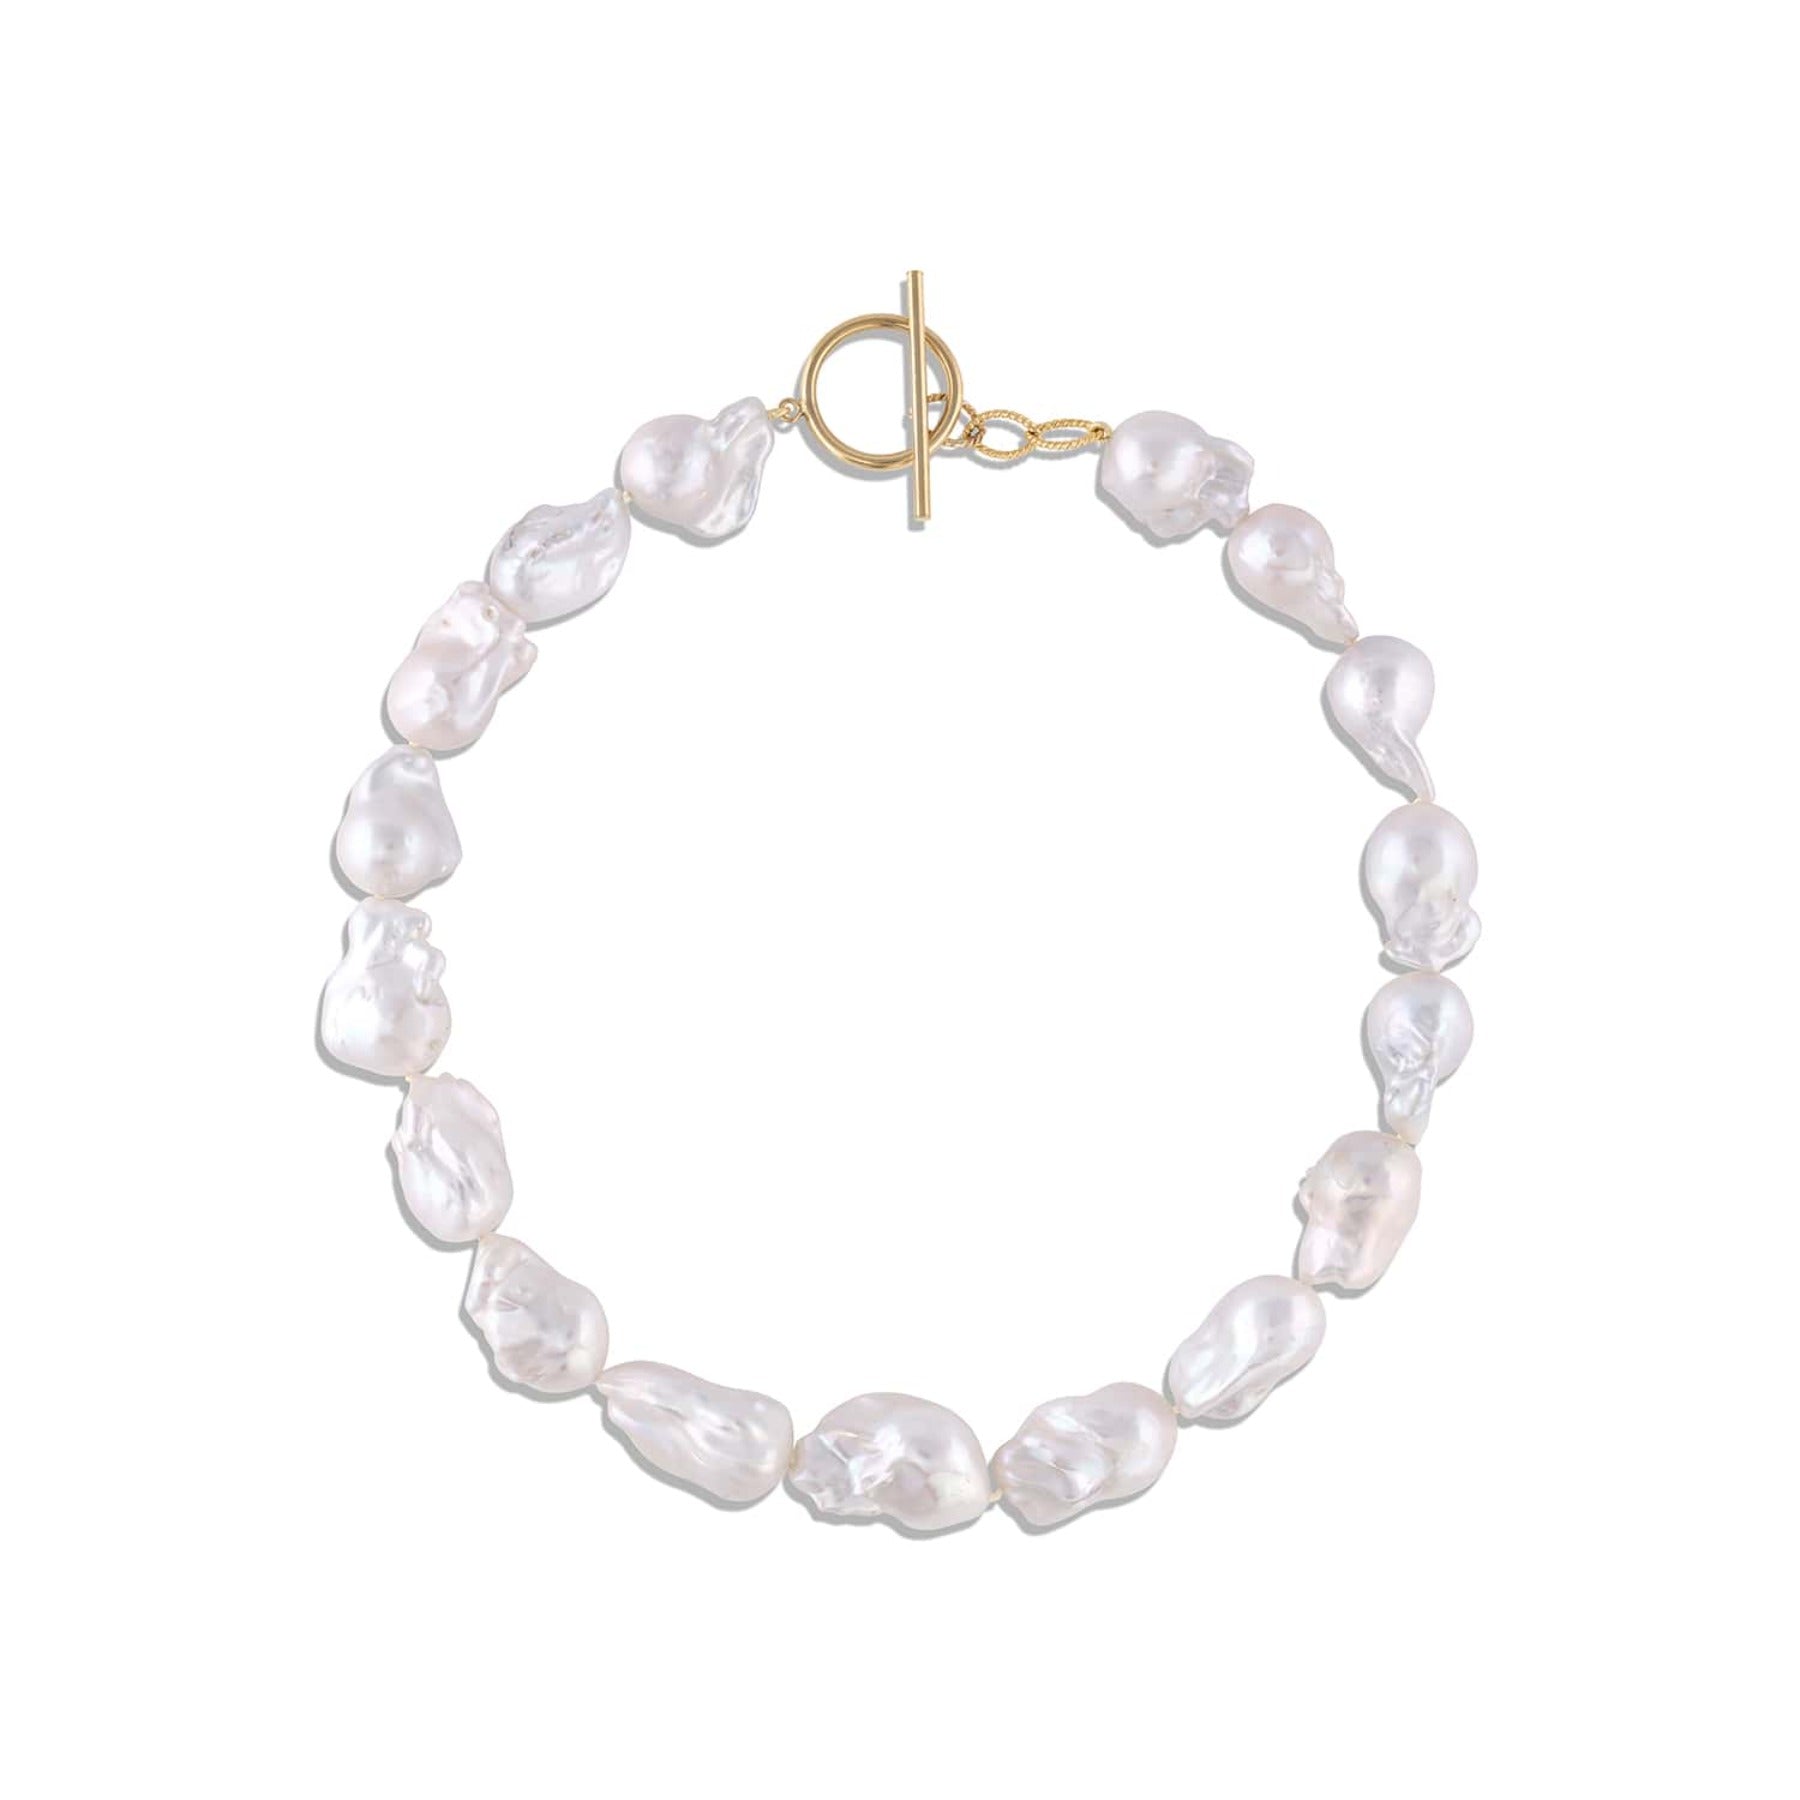 Chunky baroque pearl choker statement necklace with 14k gold-filled toggle clasp.